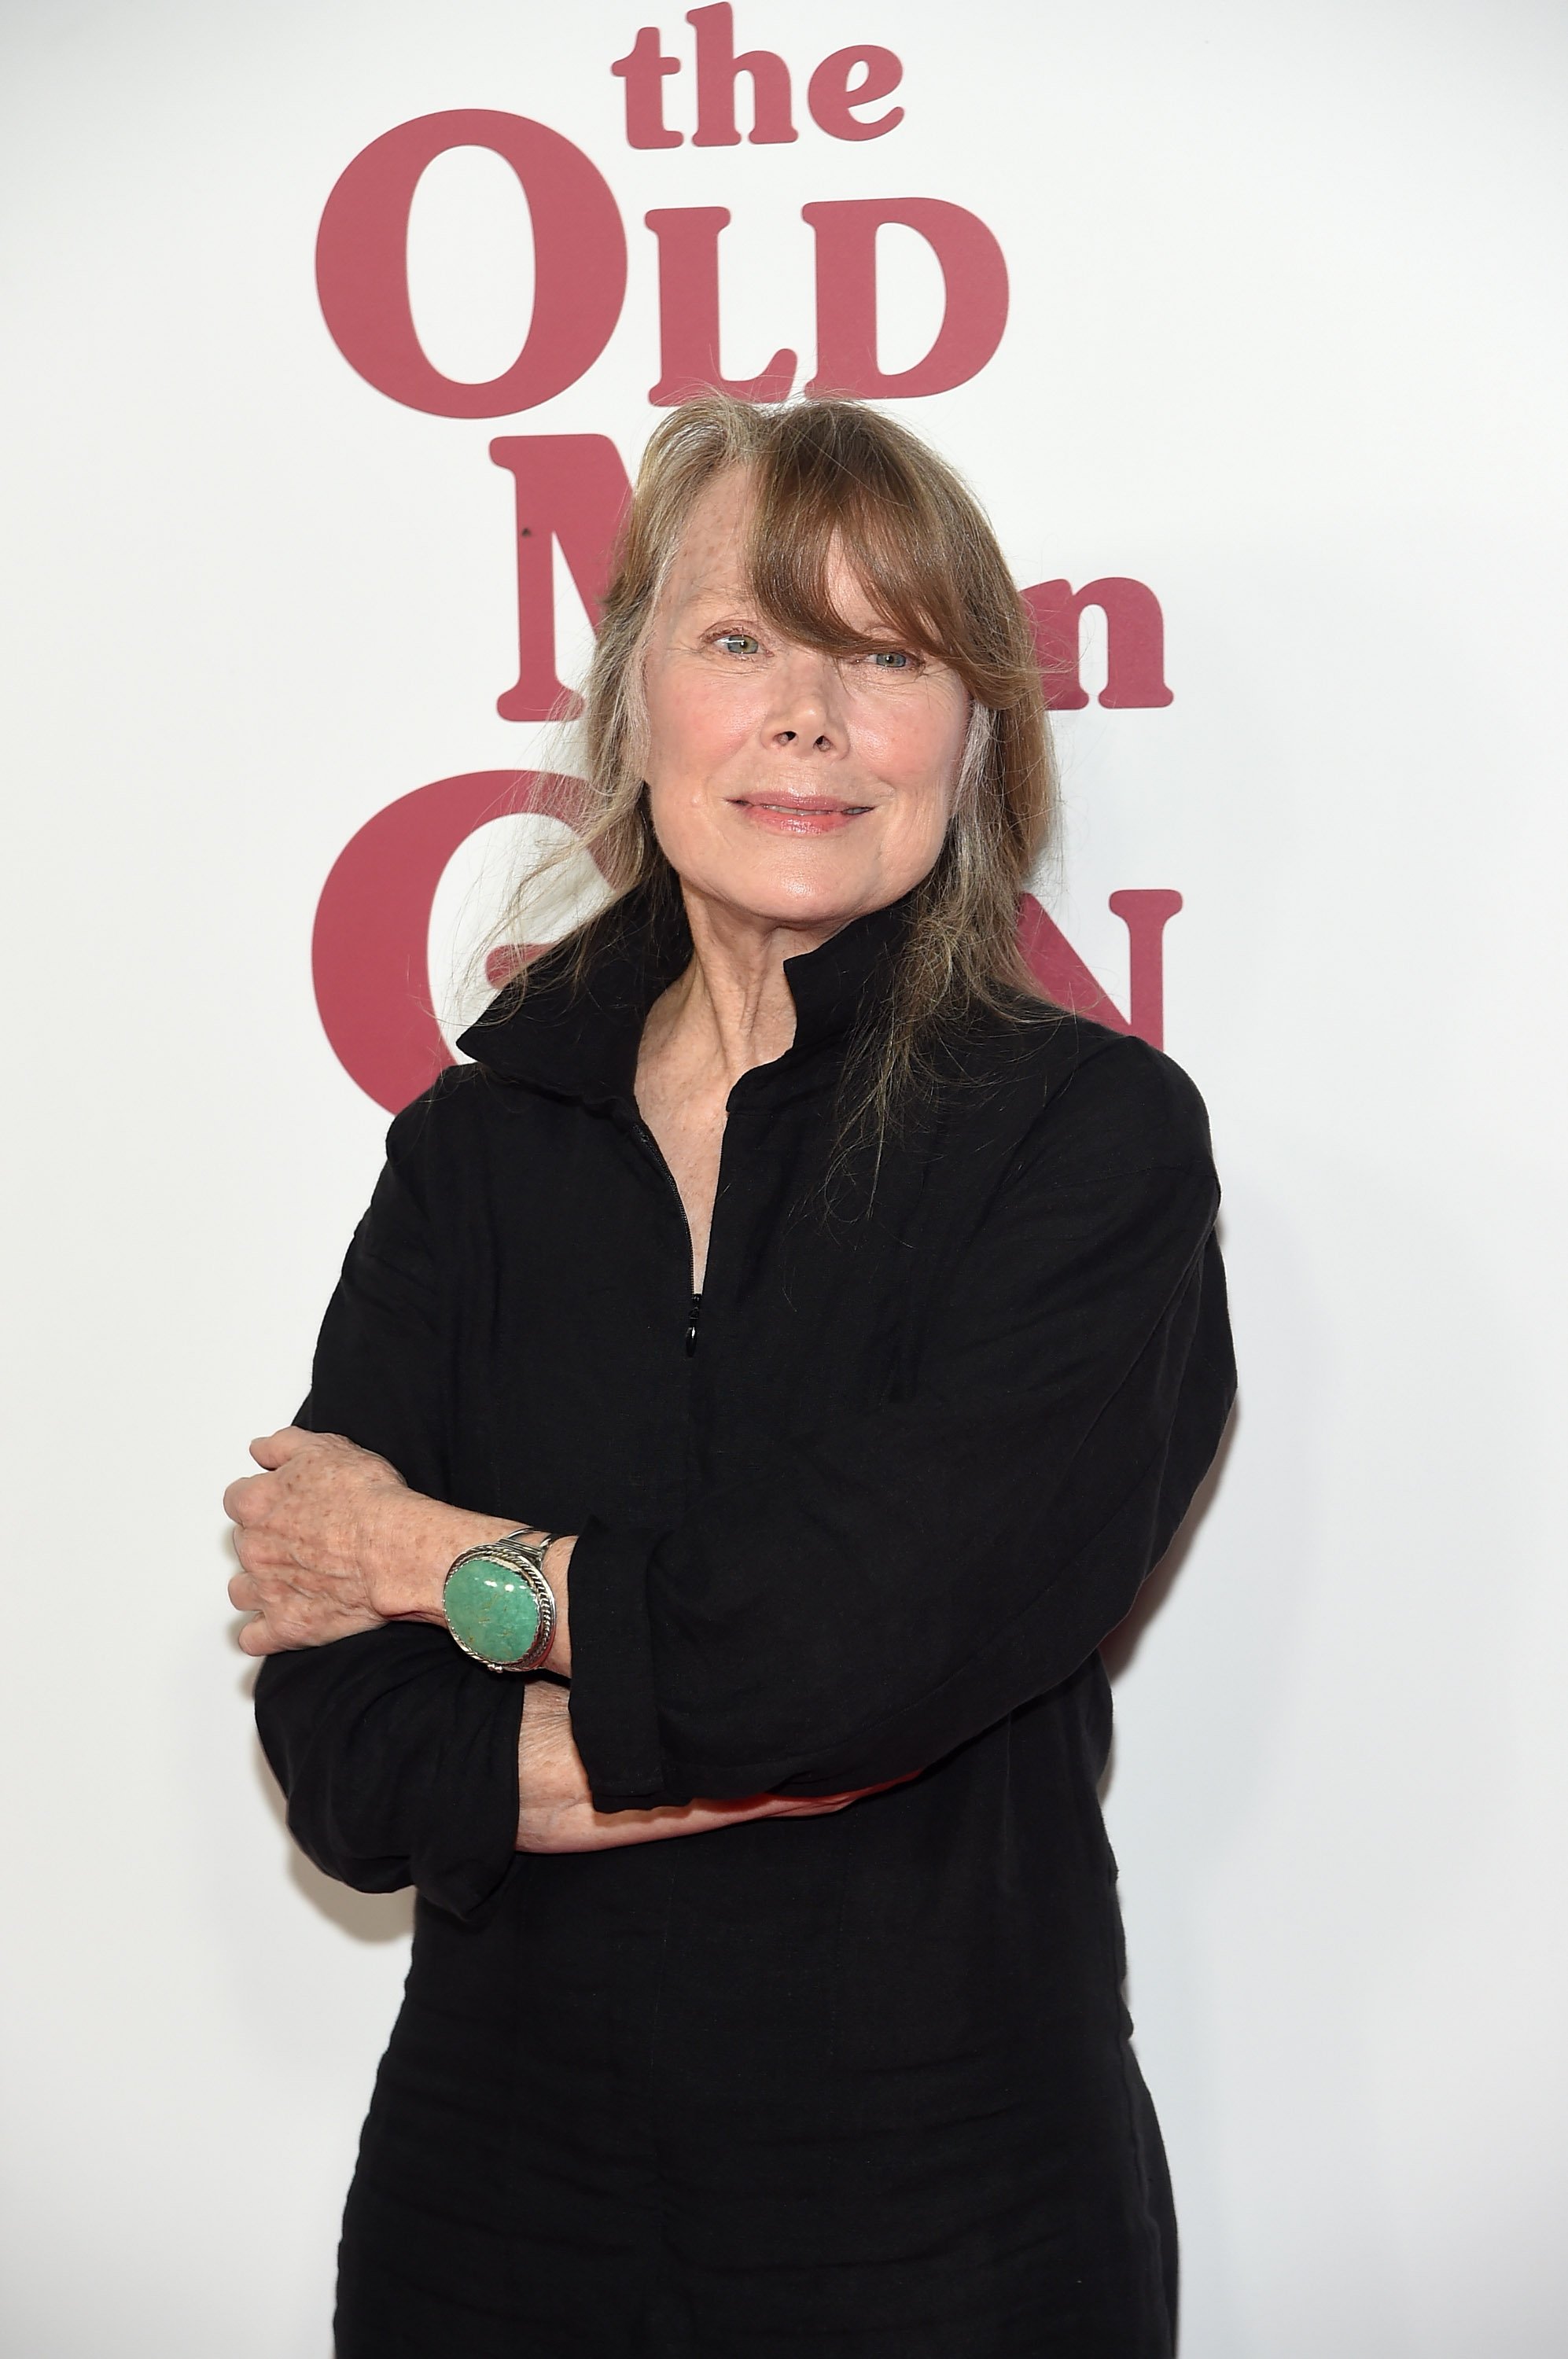  Sissy Spacek attends the "The Old Man & The Gun" premiere at Paris Theatre on September 20, 2018 | Photo: Getty Images